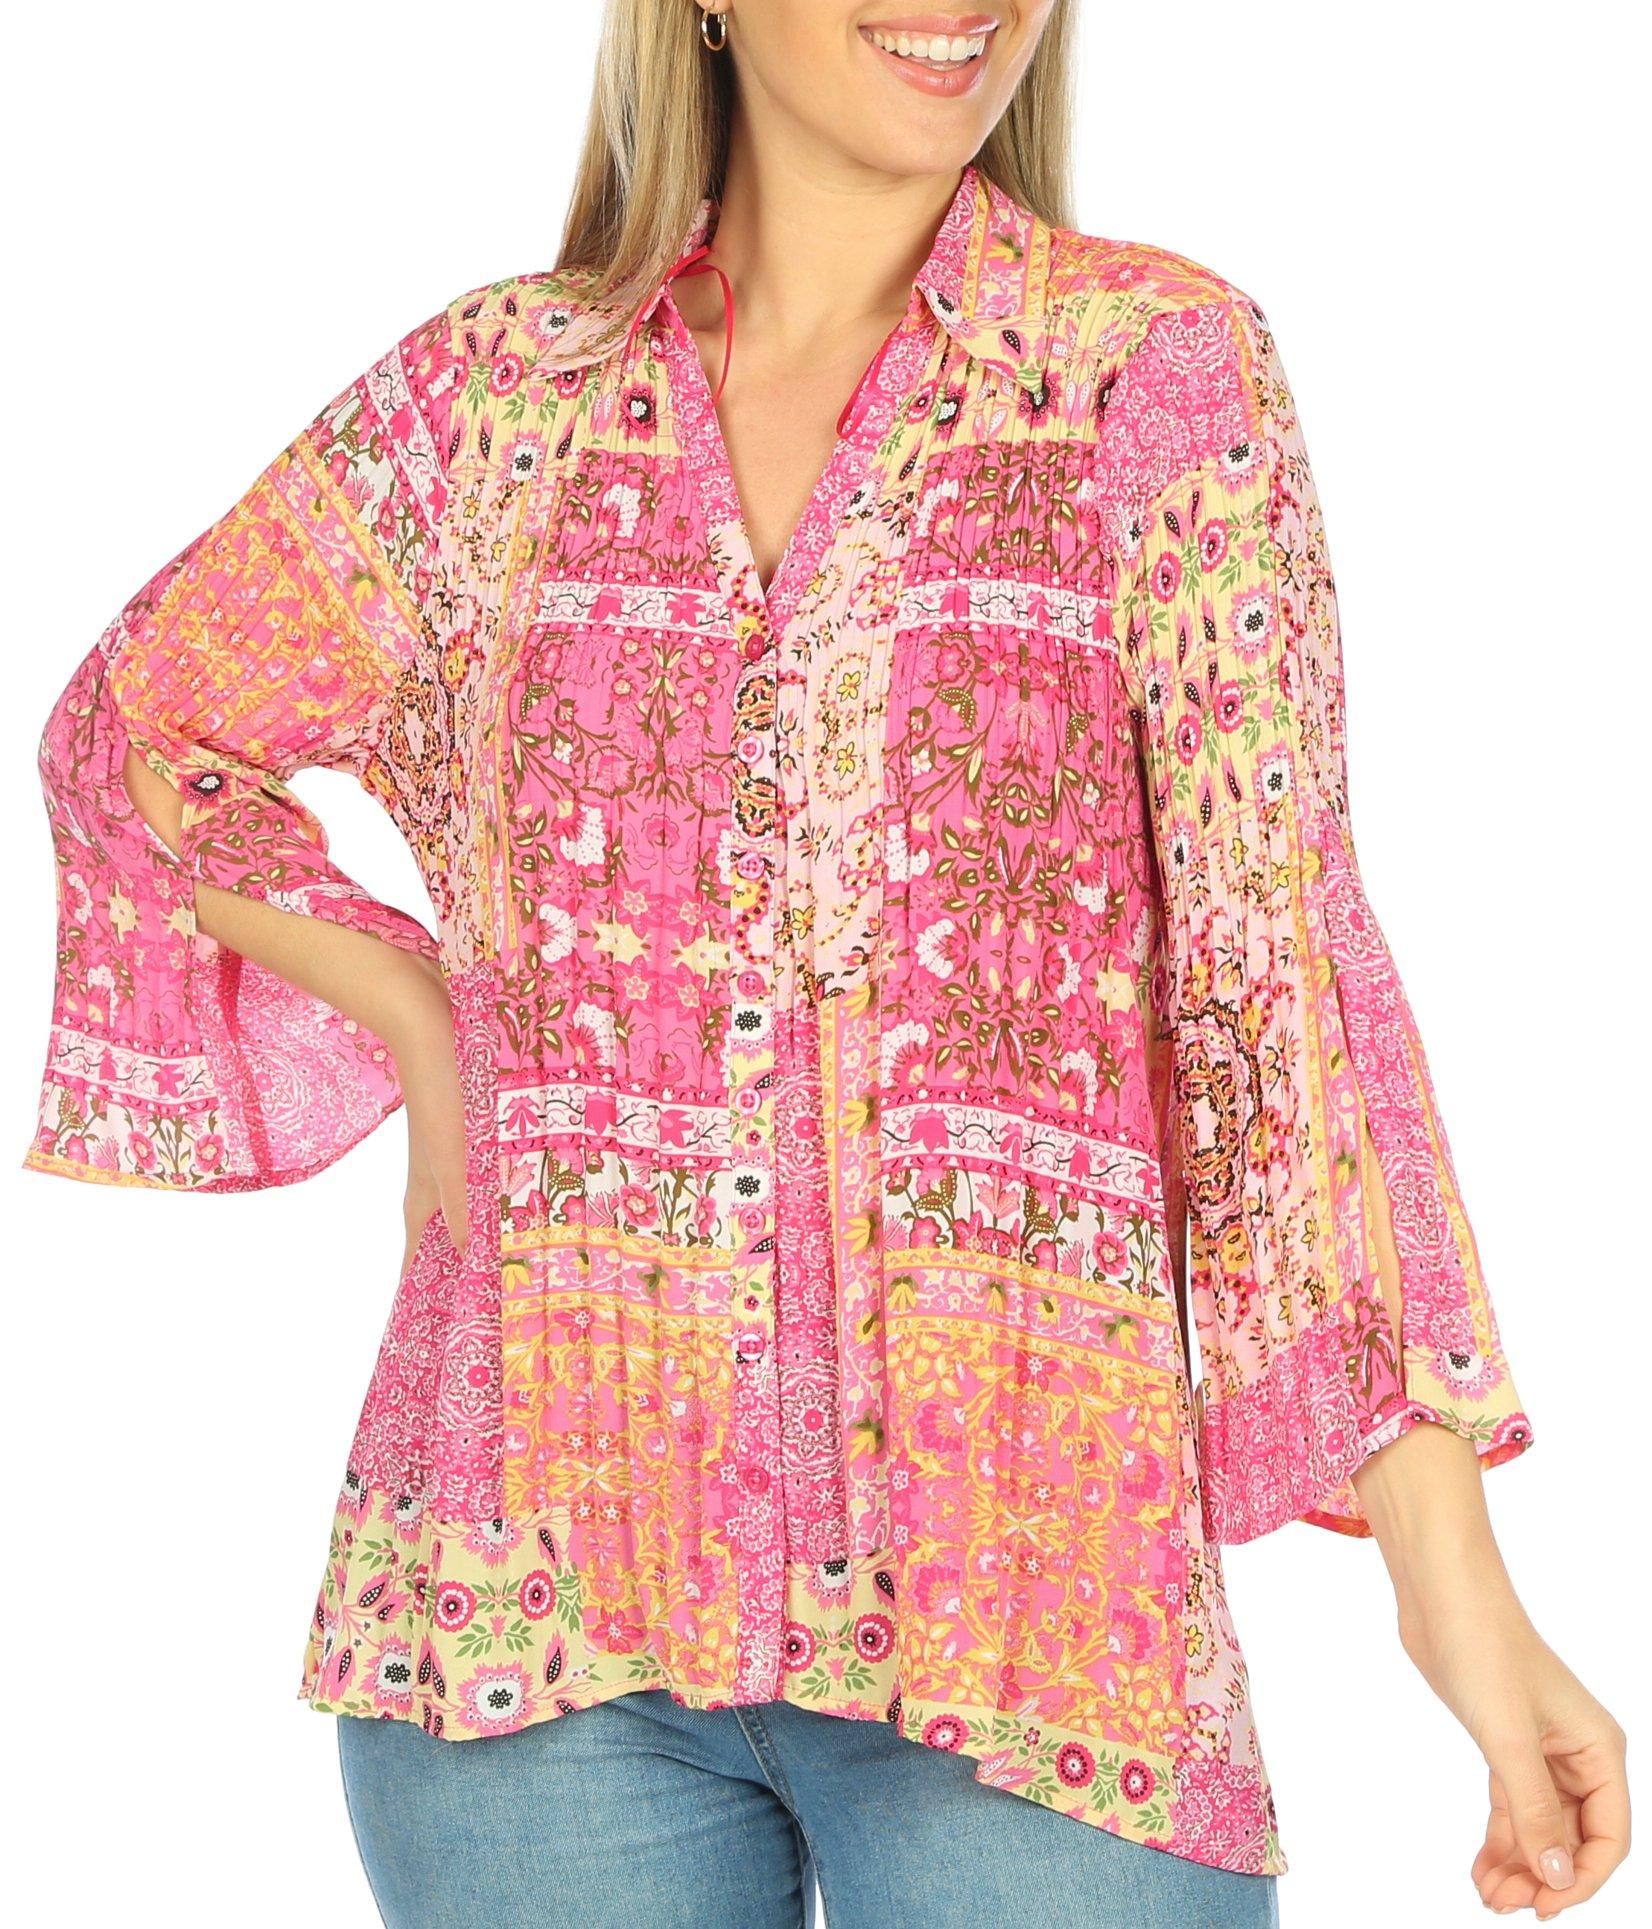 Sunny Leigh Womens Button Down Print Crinkle 3/4 Sleeve Top